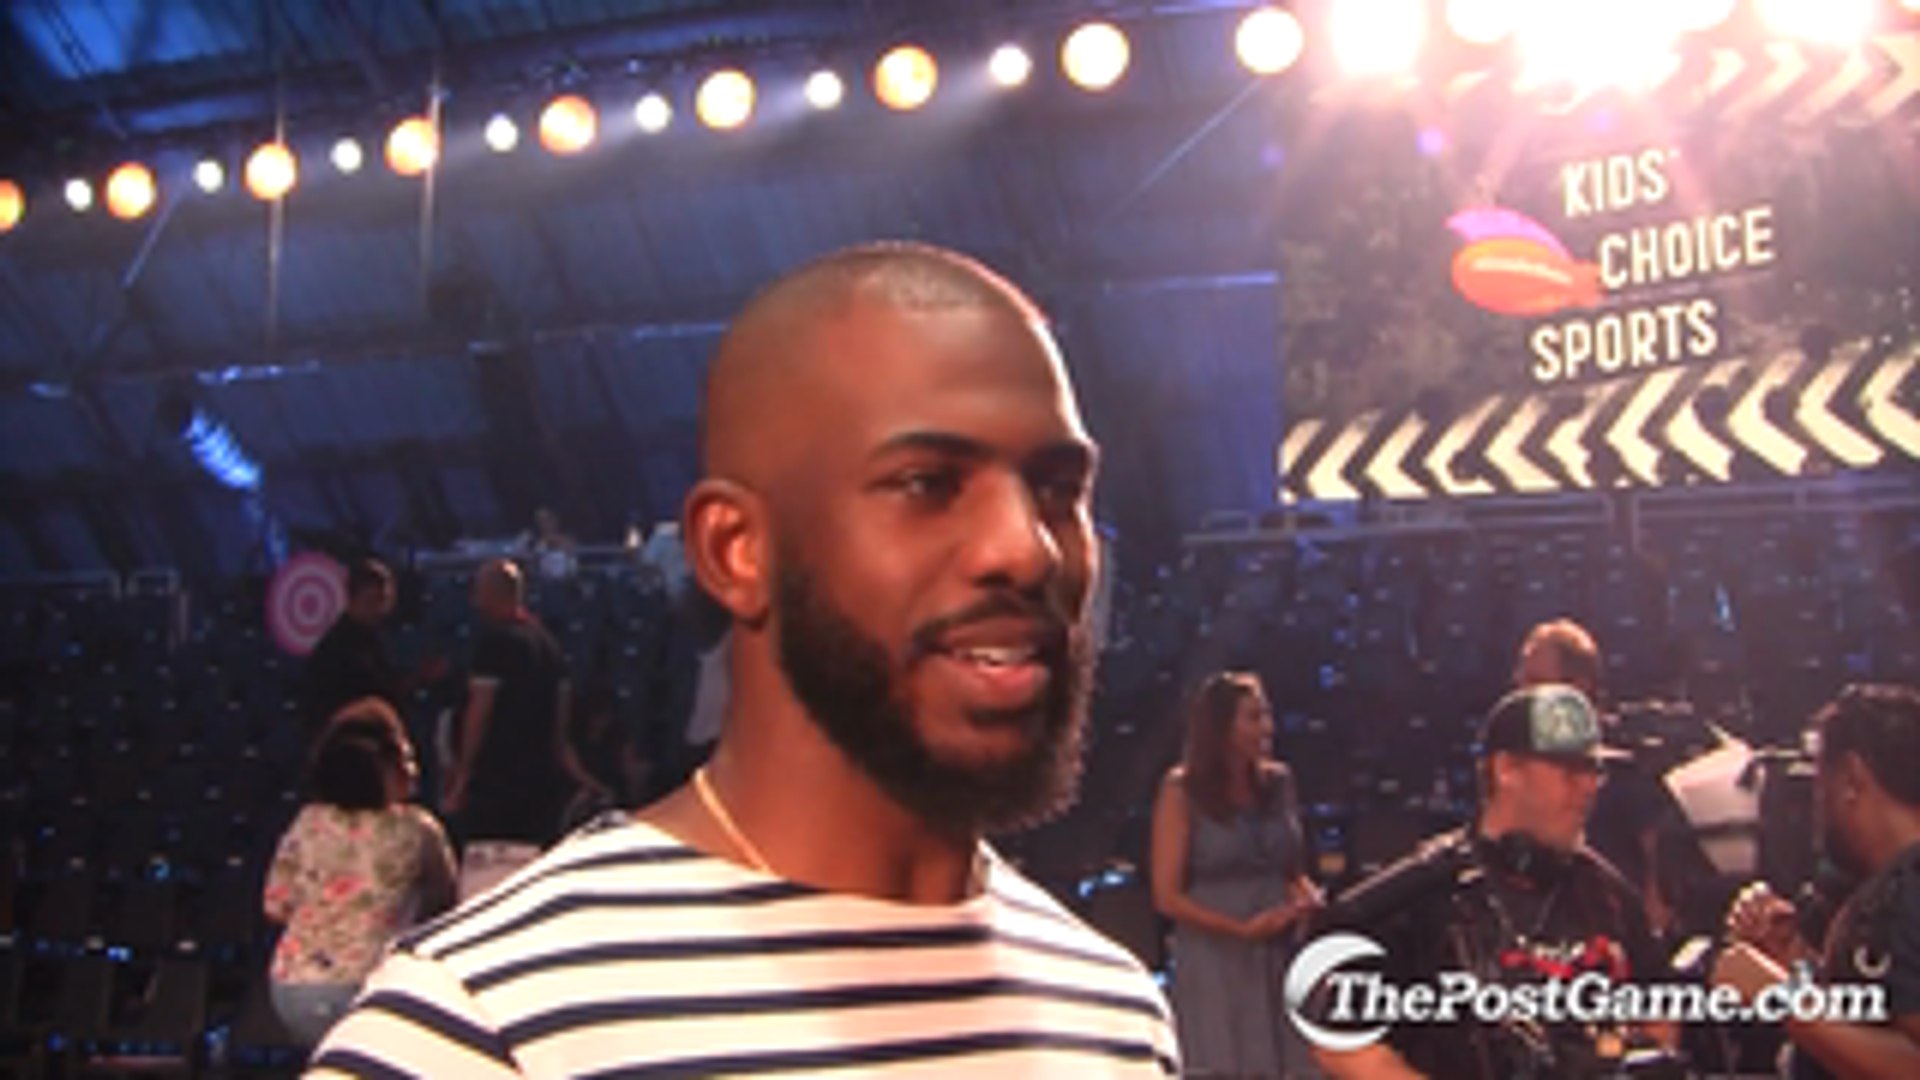 Chris Paul Gets Ready For Slime As Nickelodeon Kids Choice Sports